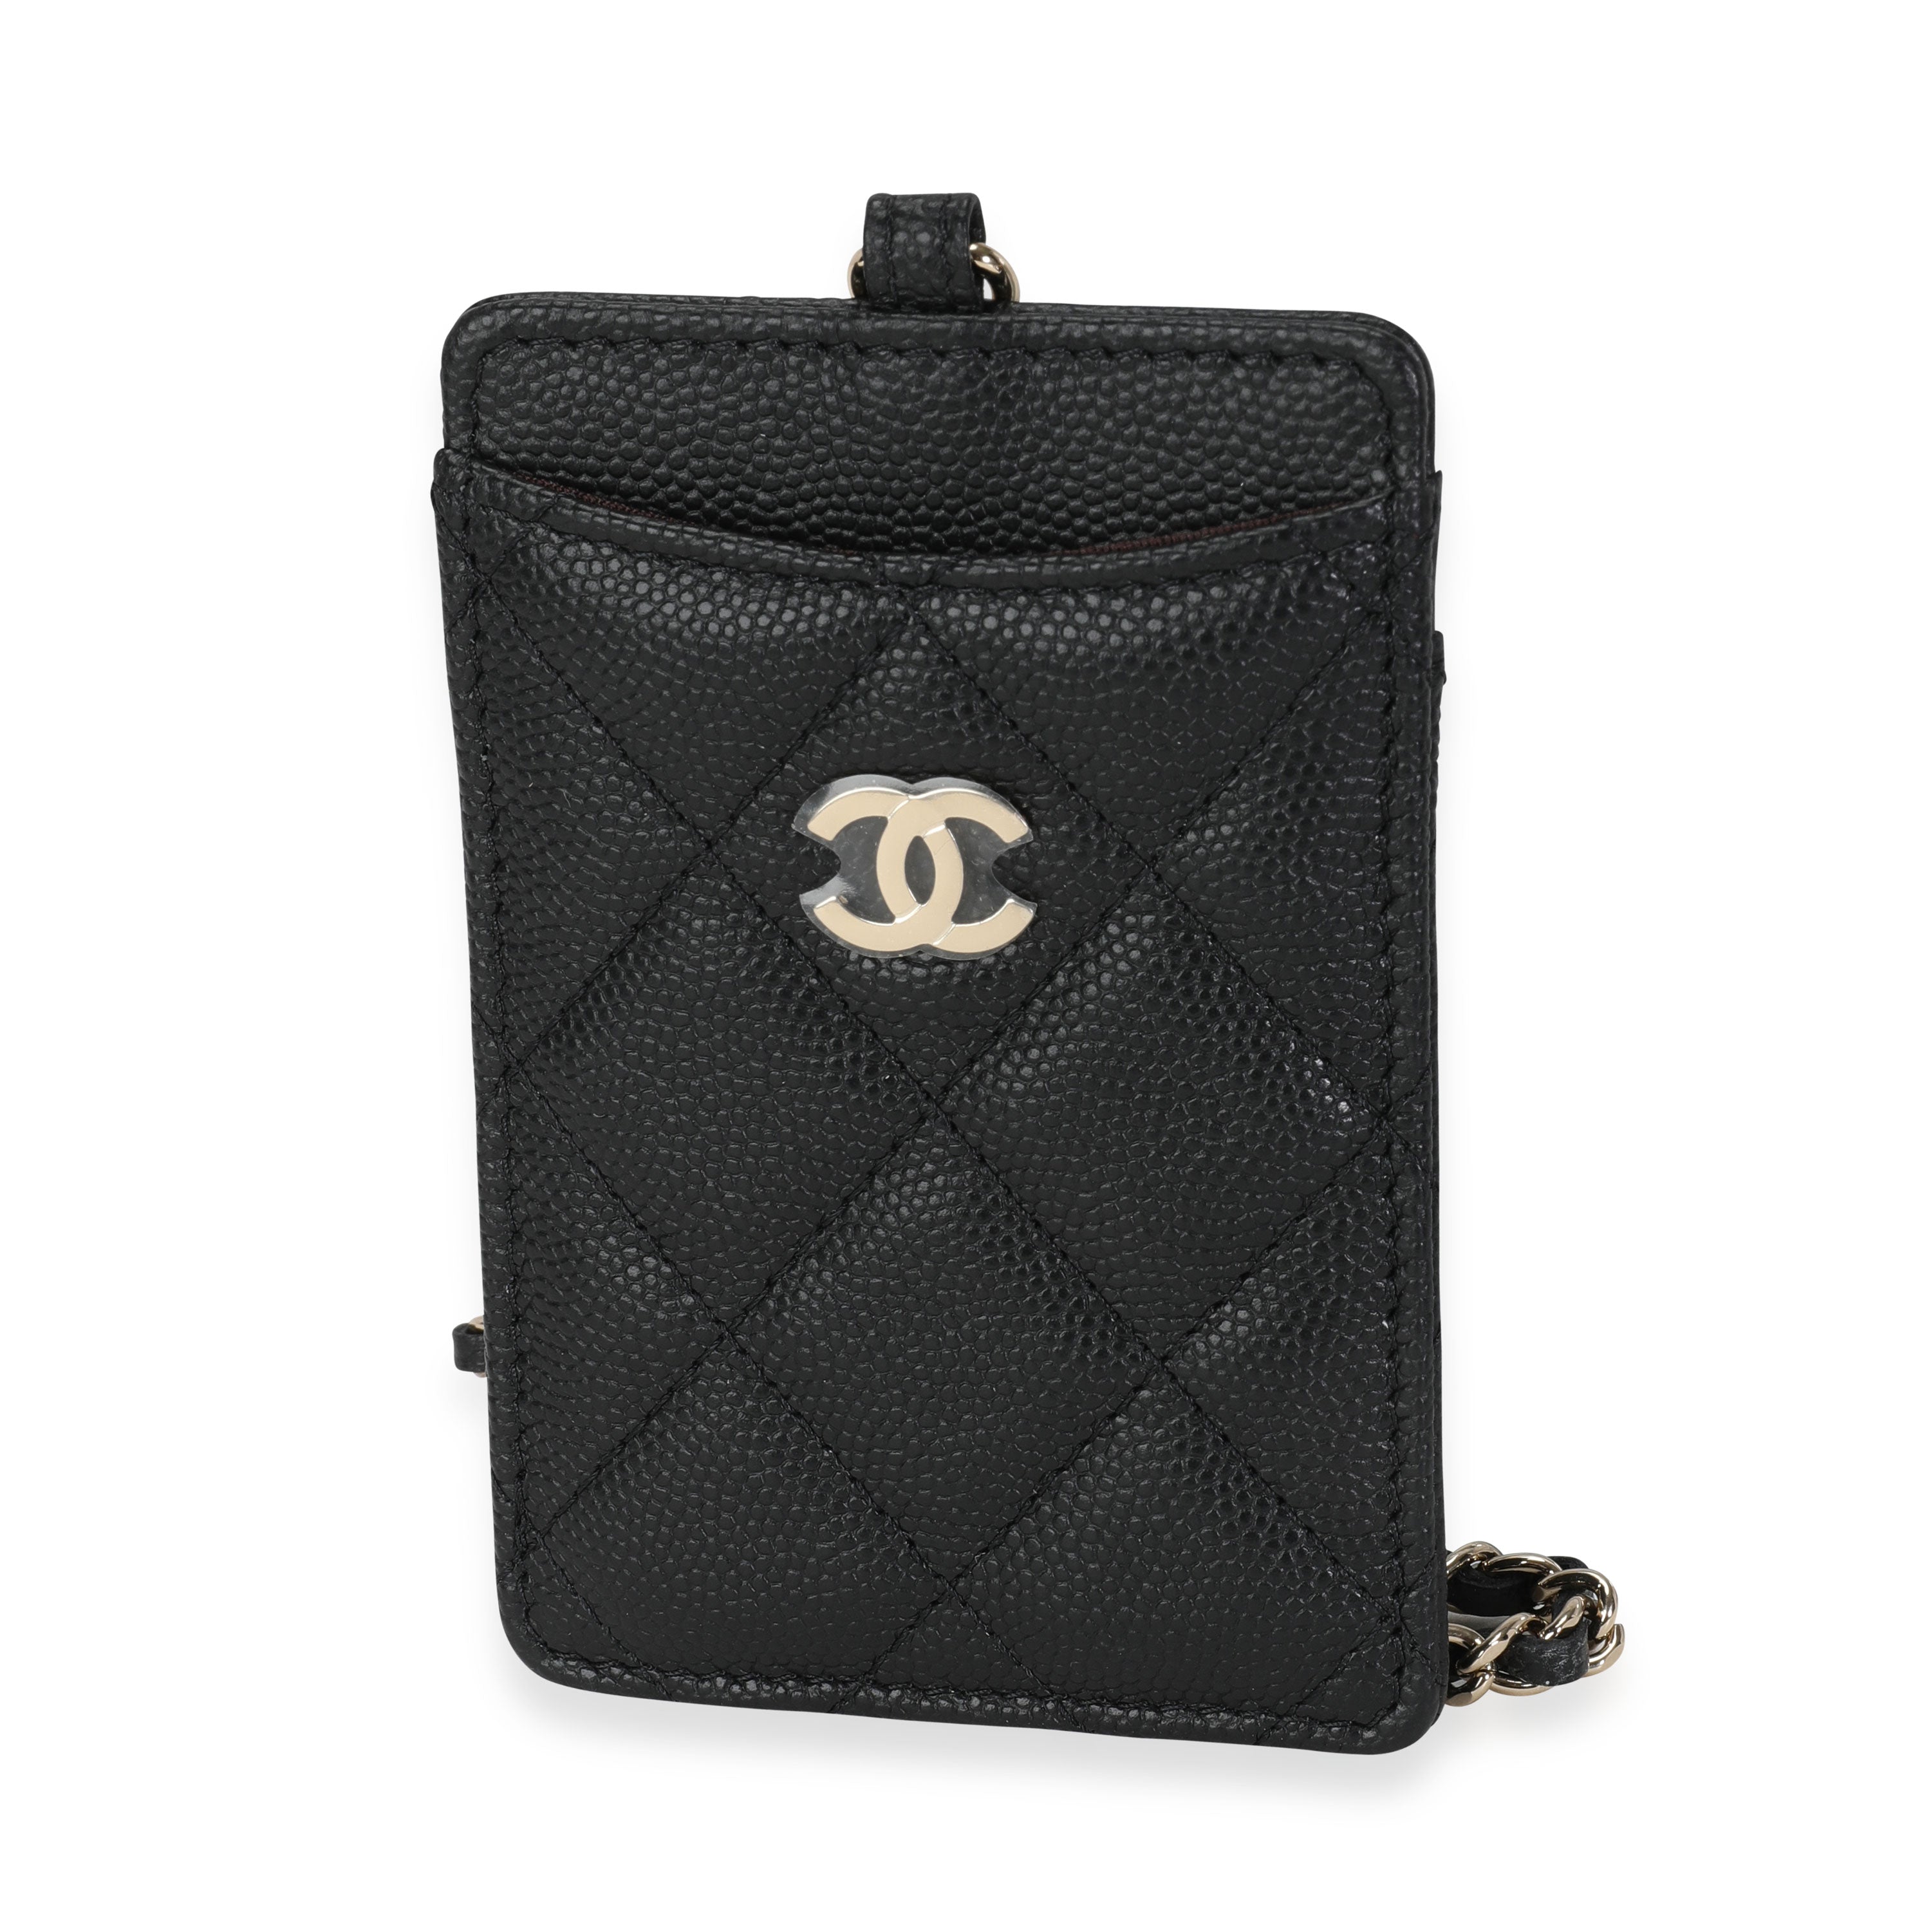 CHANEL, Bags, Brand New Never Used Chanel Mini Pochette Wallet Card  Holder Phone Case